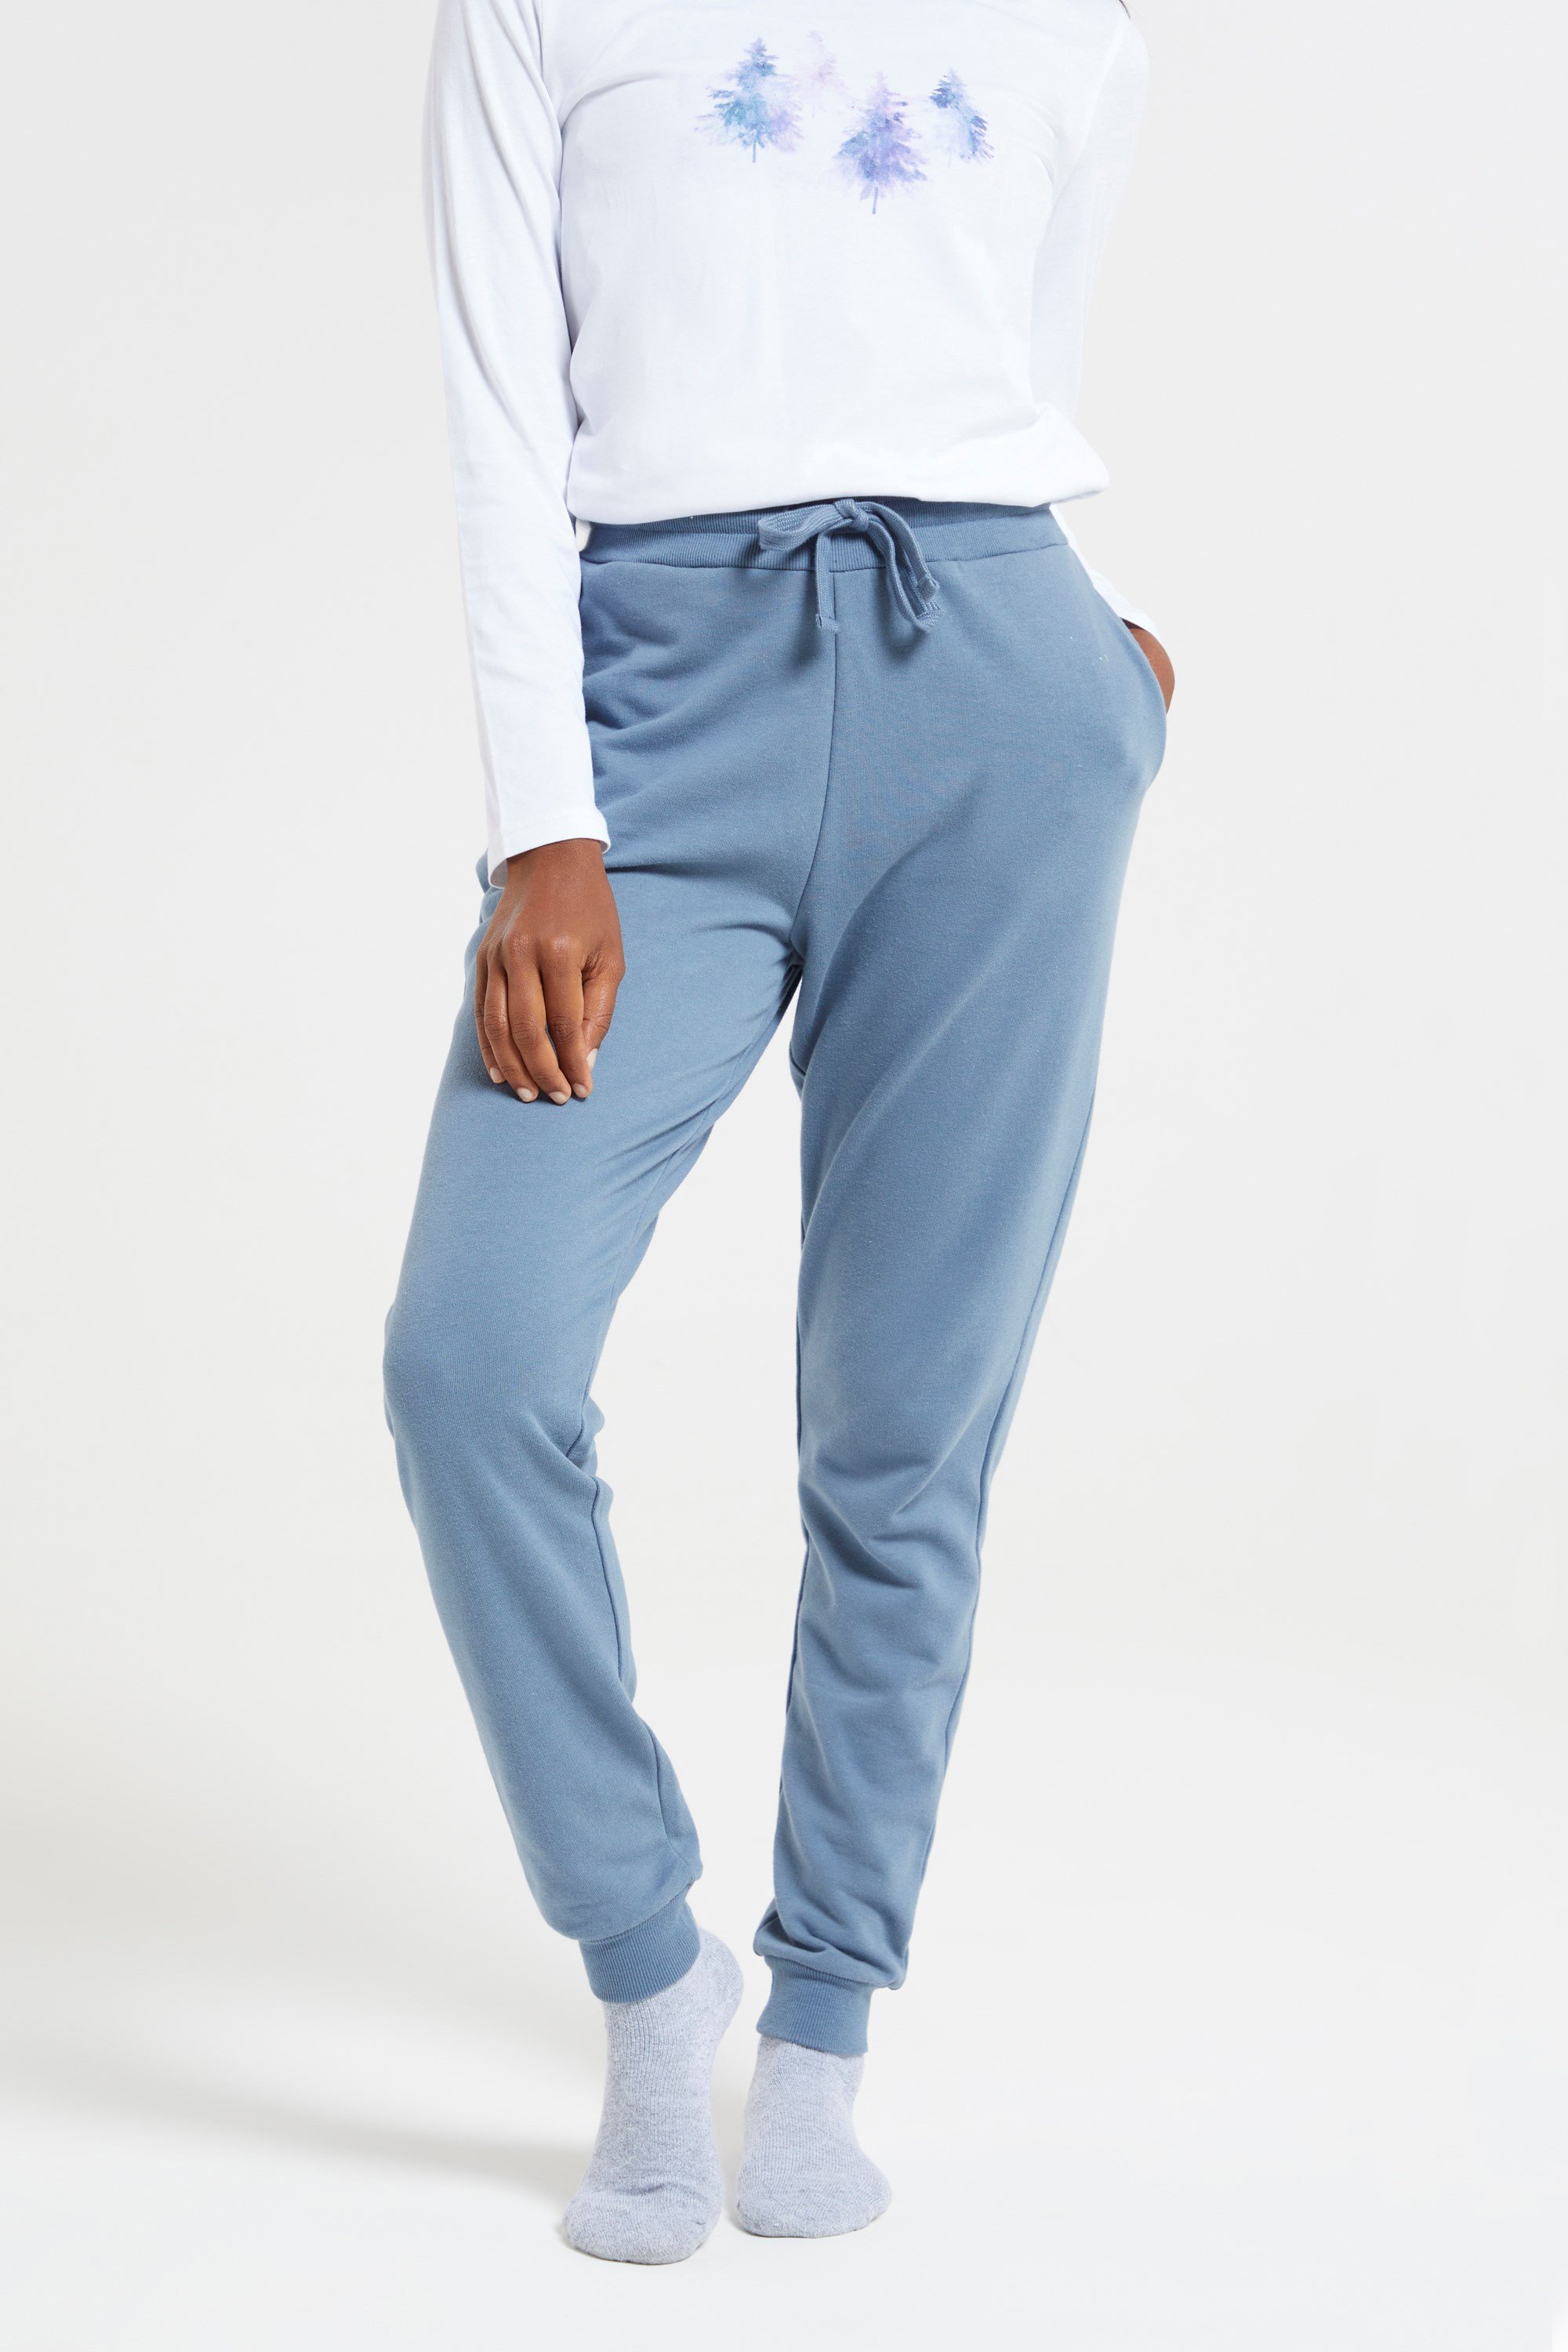 Women Ambar Lounge Jogger Pants with Banded Ankles Soft Sweatpants